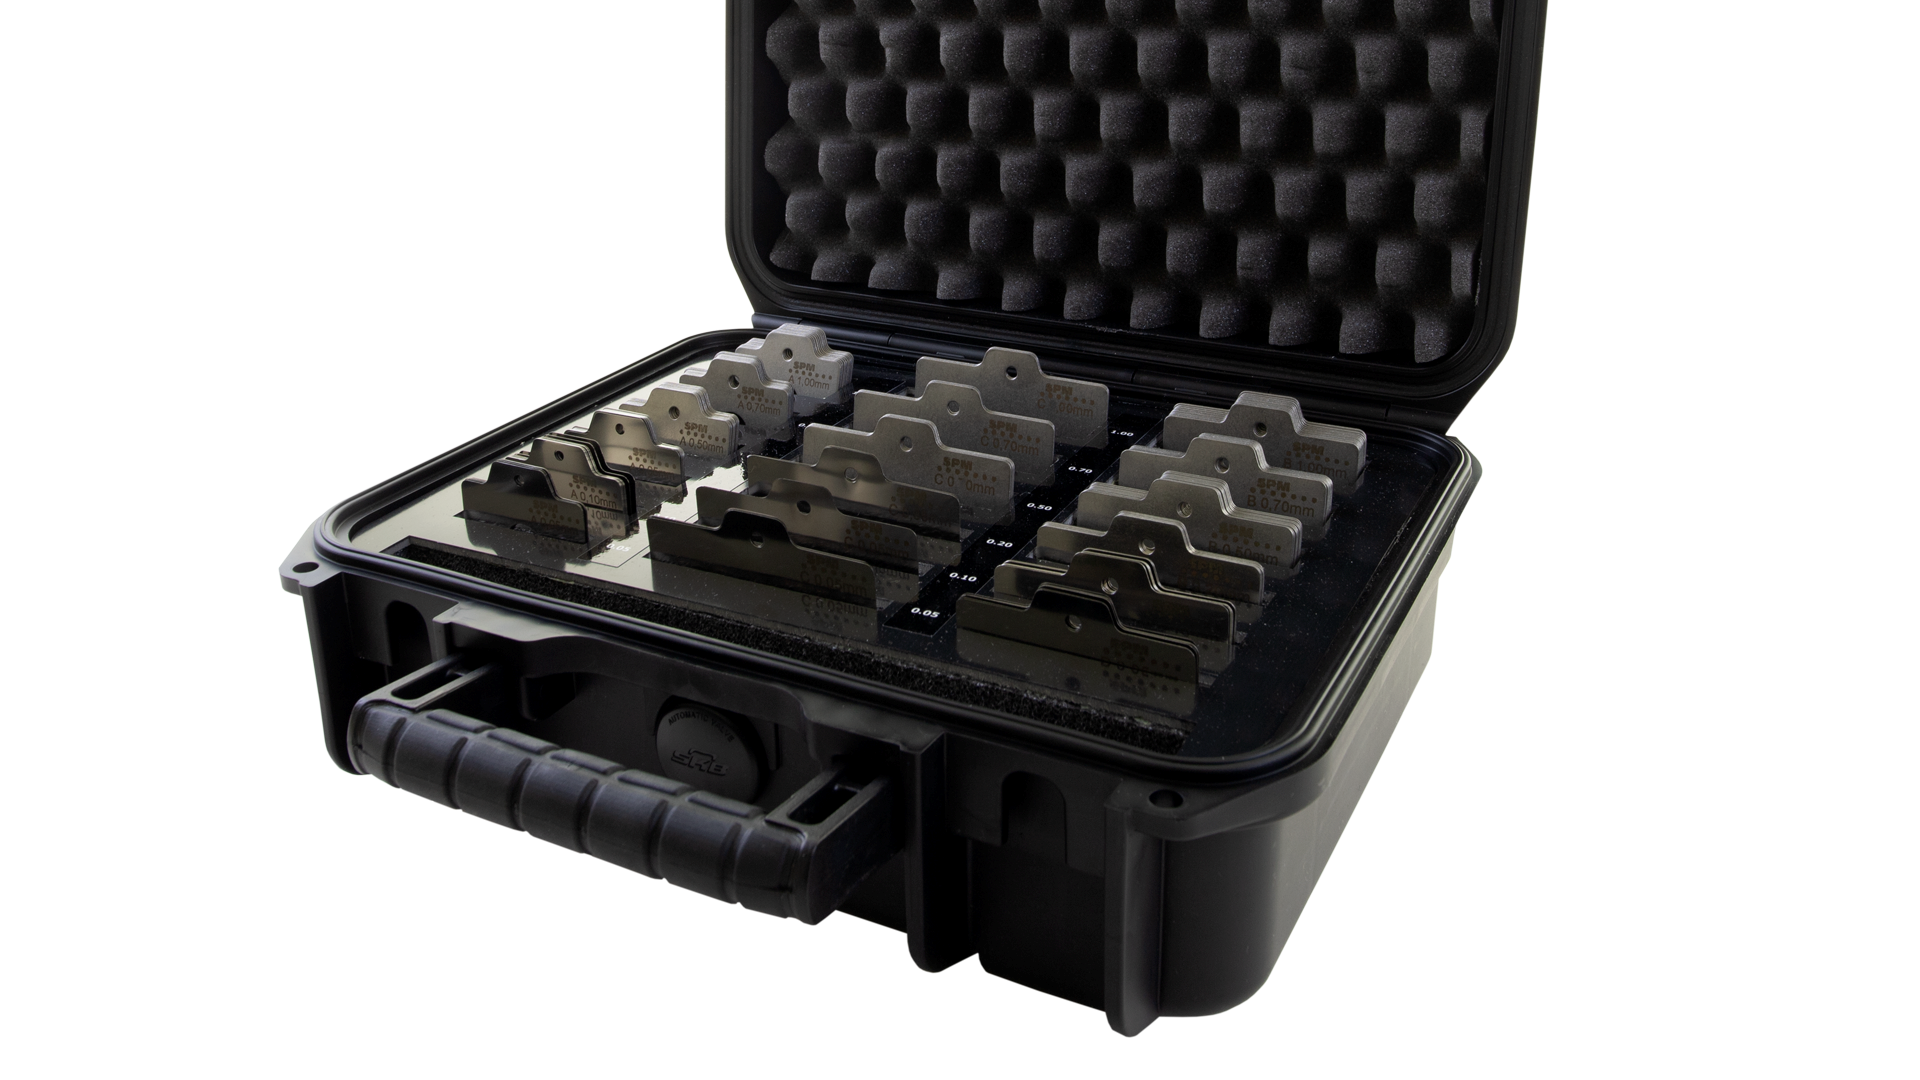 SPM shims placed in a carrying case